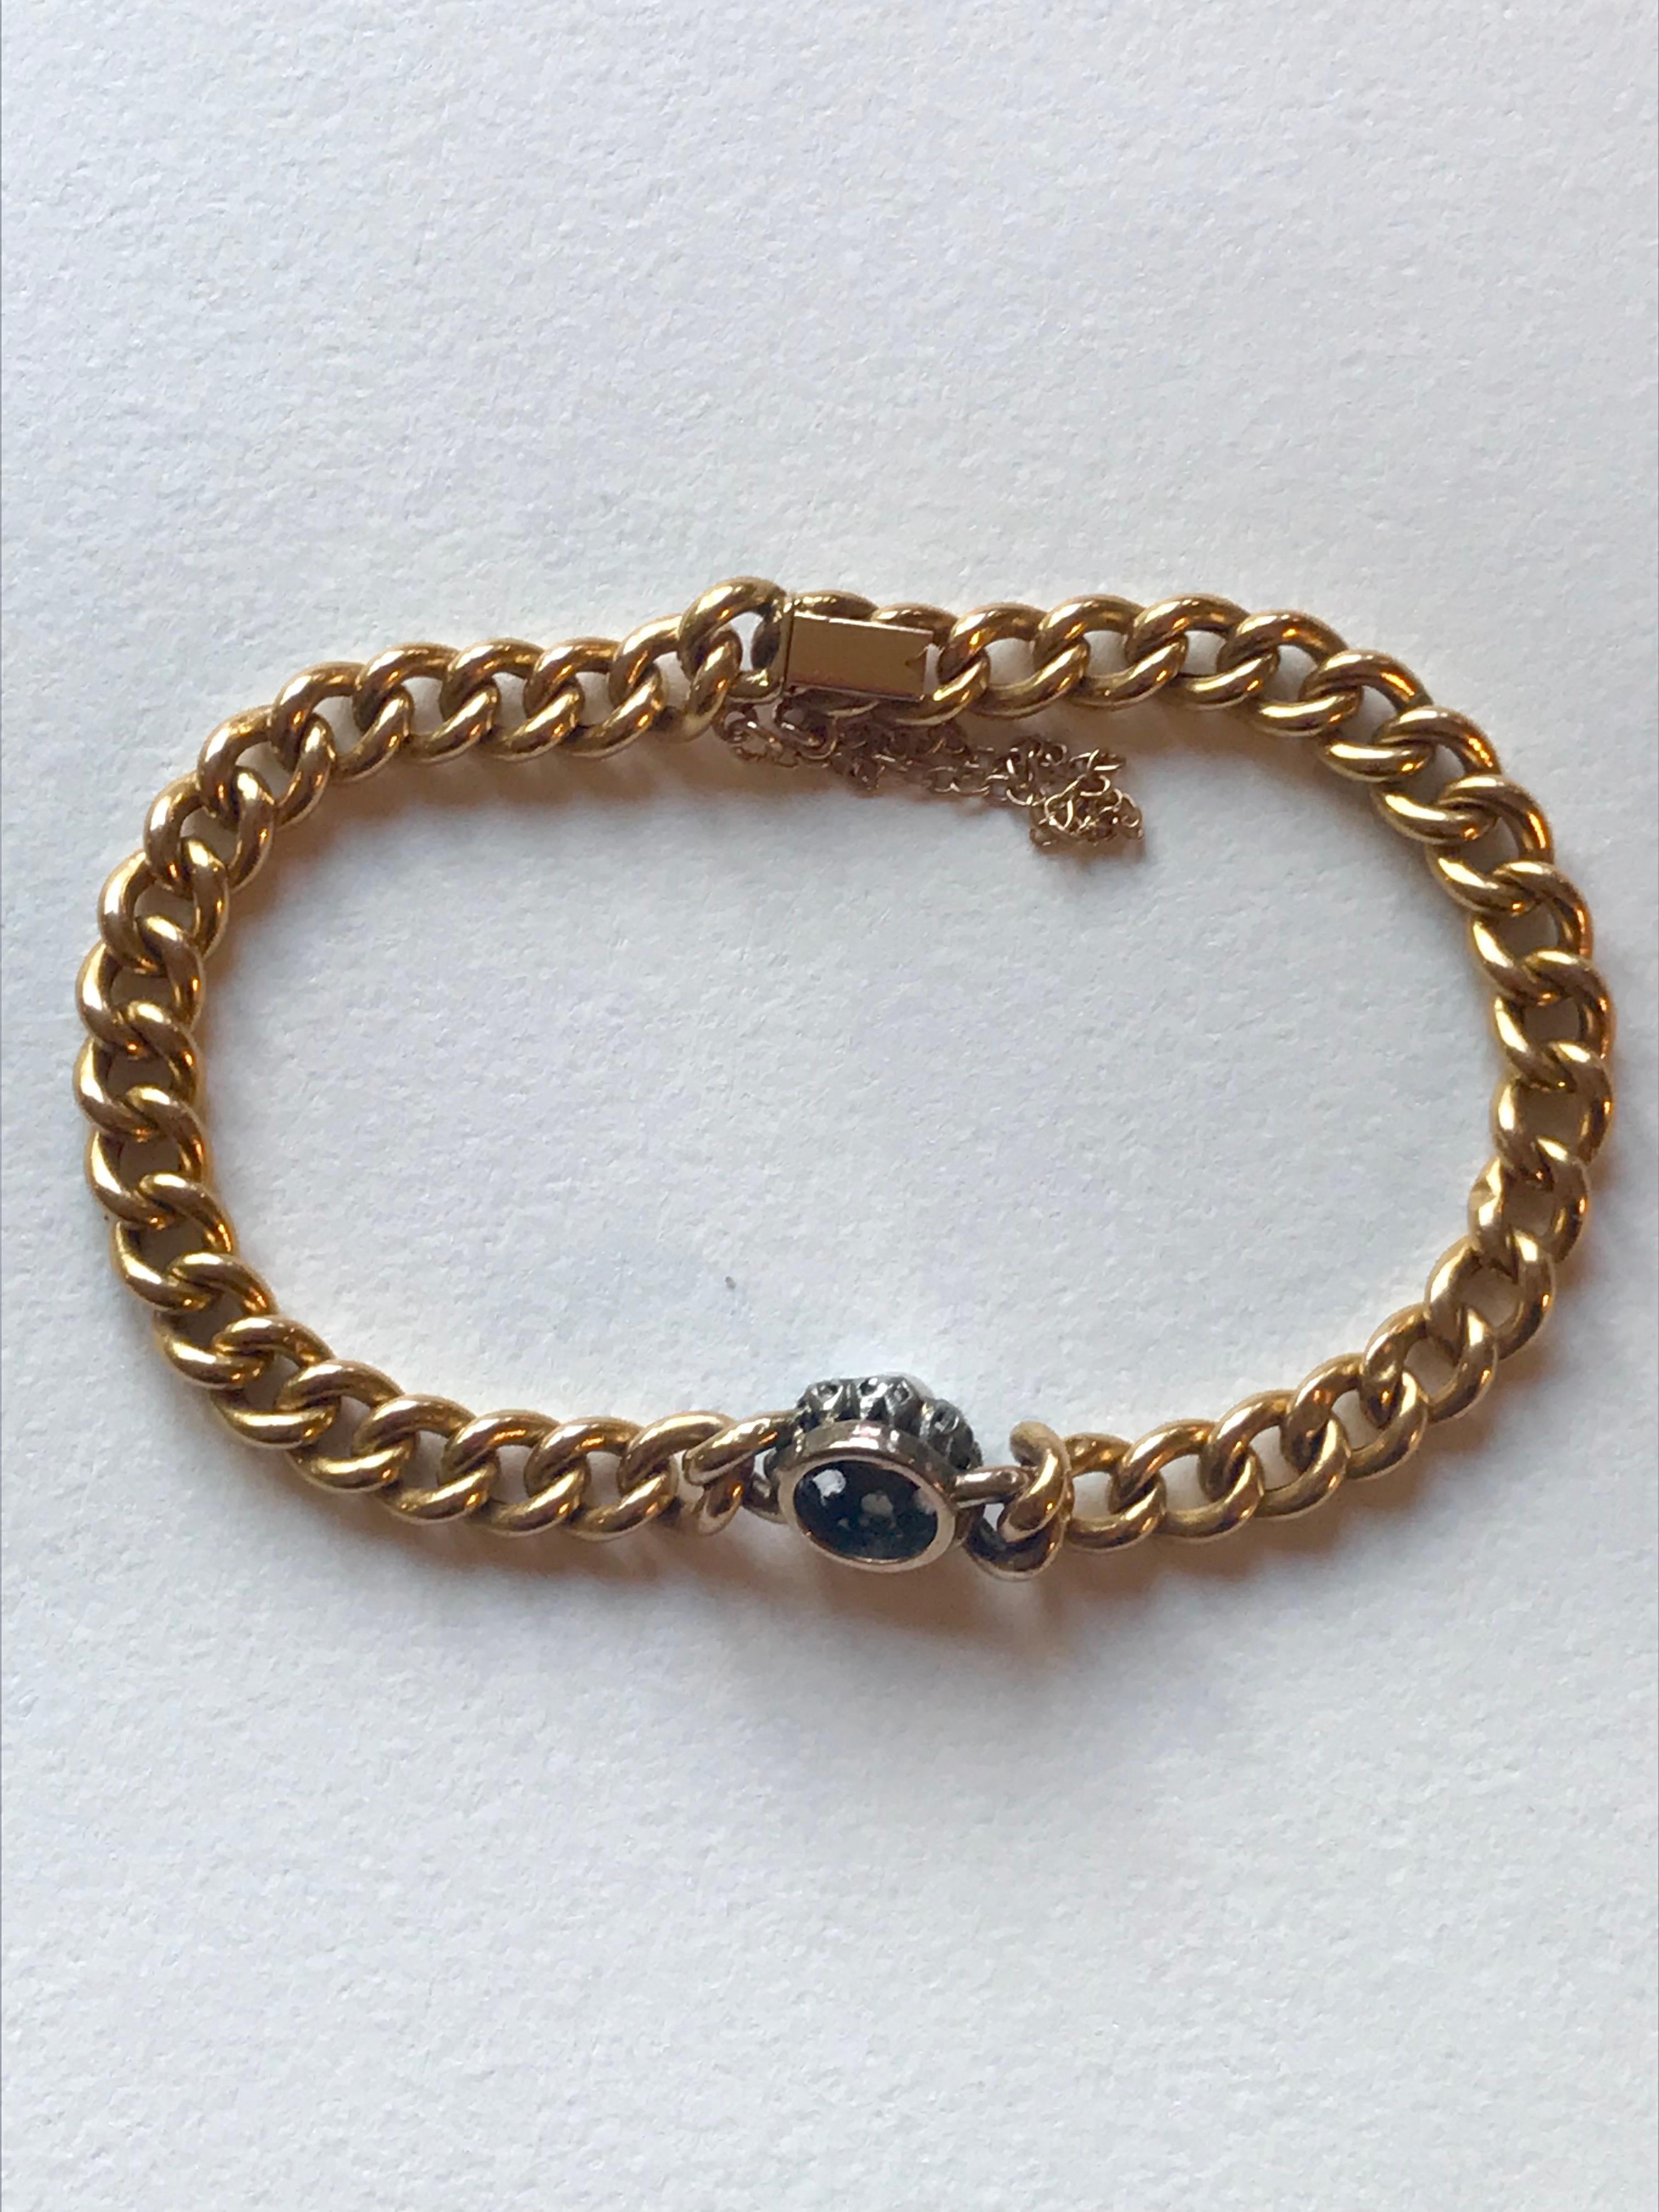 A diamond and pearl (untested) 18 karat gold bracelet set with rose cuts estimated to be 0.4cts in weight.  The Diamonds have a lot of fire (which is a technical turn meaning they refract the light well and sparkle). This is a bracelet which is in